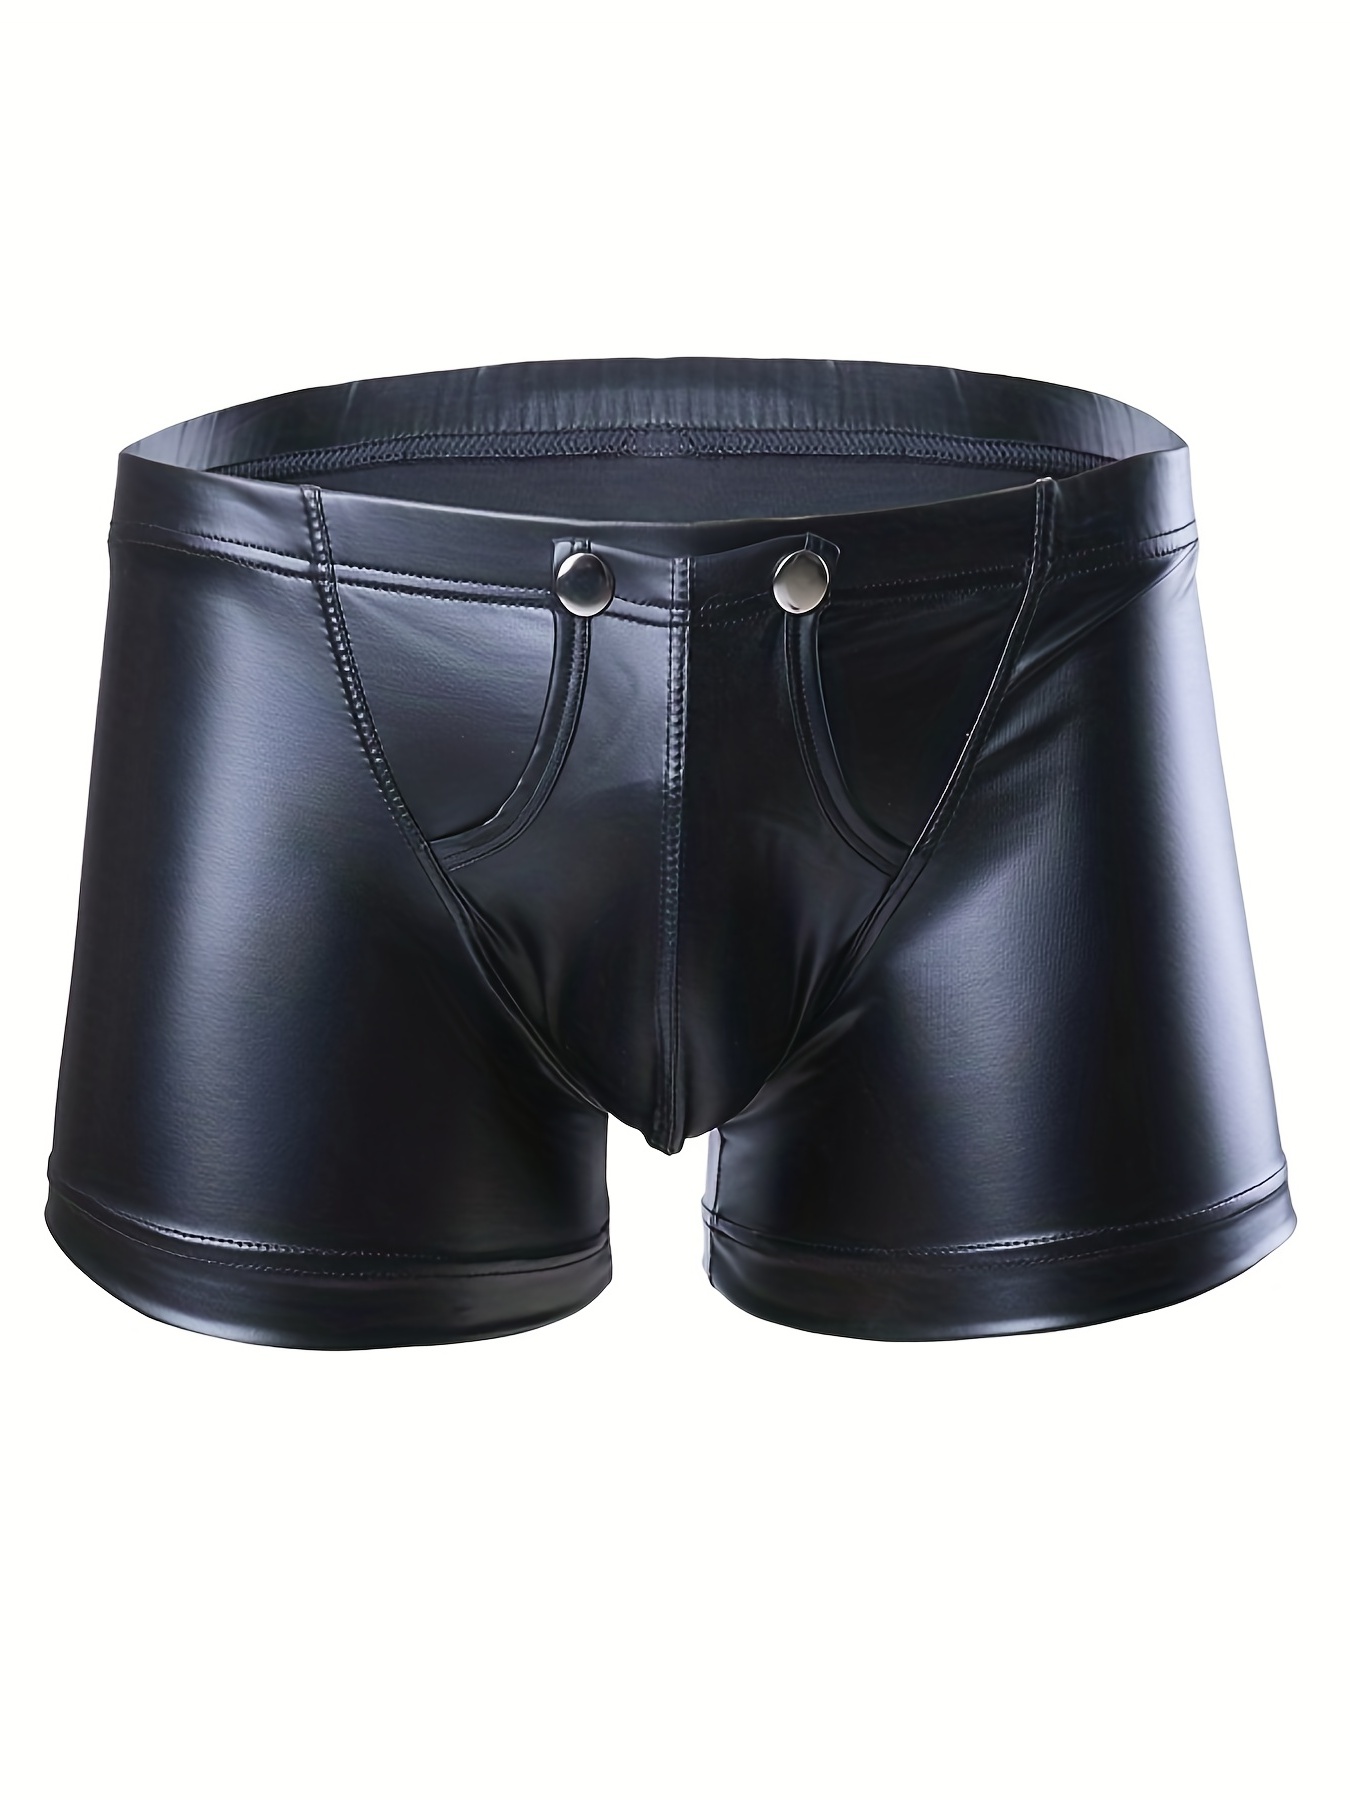 OROCOJUCO Men's Modal Ruched Back Briefs Underwear Male Posing String  Shorts Pouch Briefs